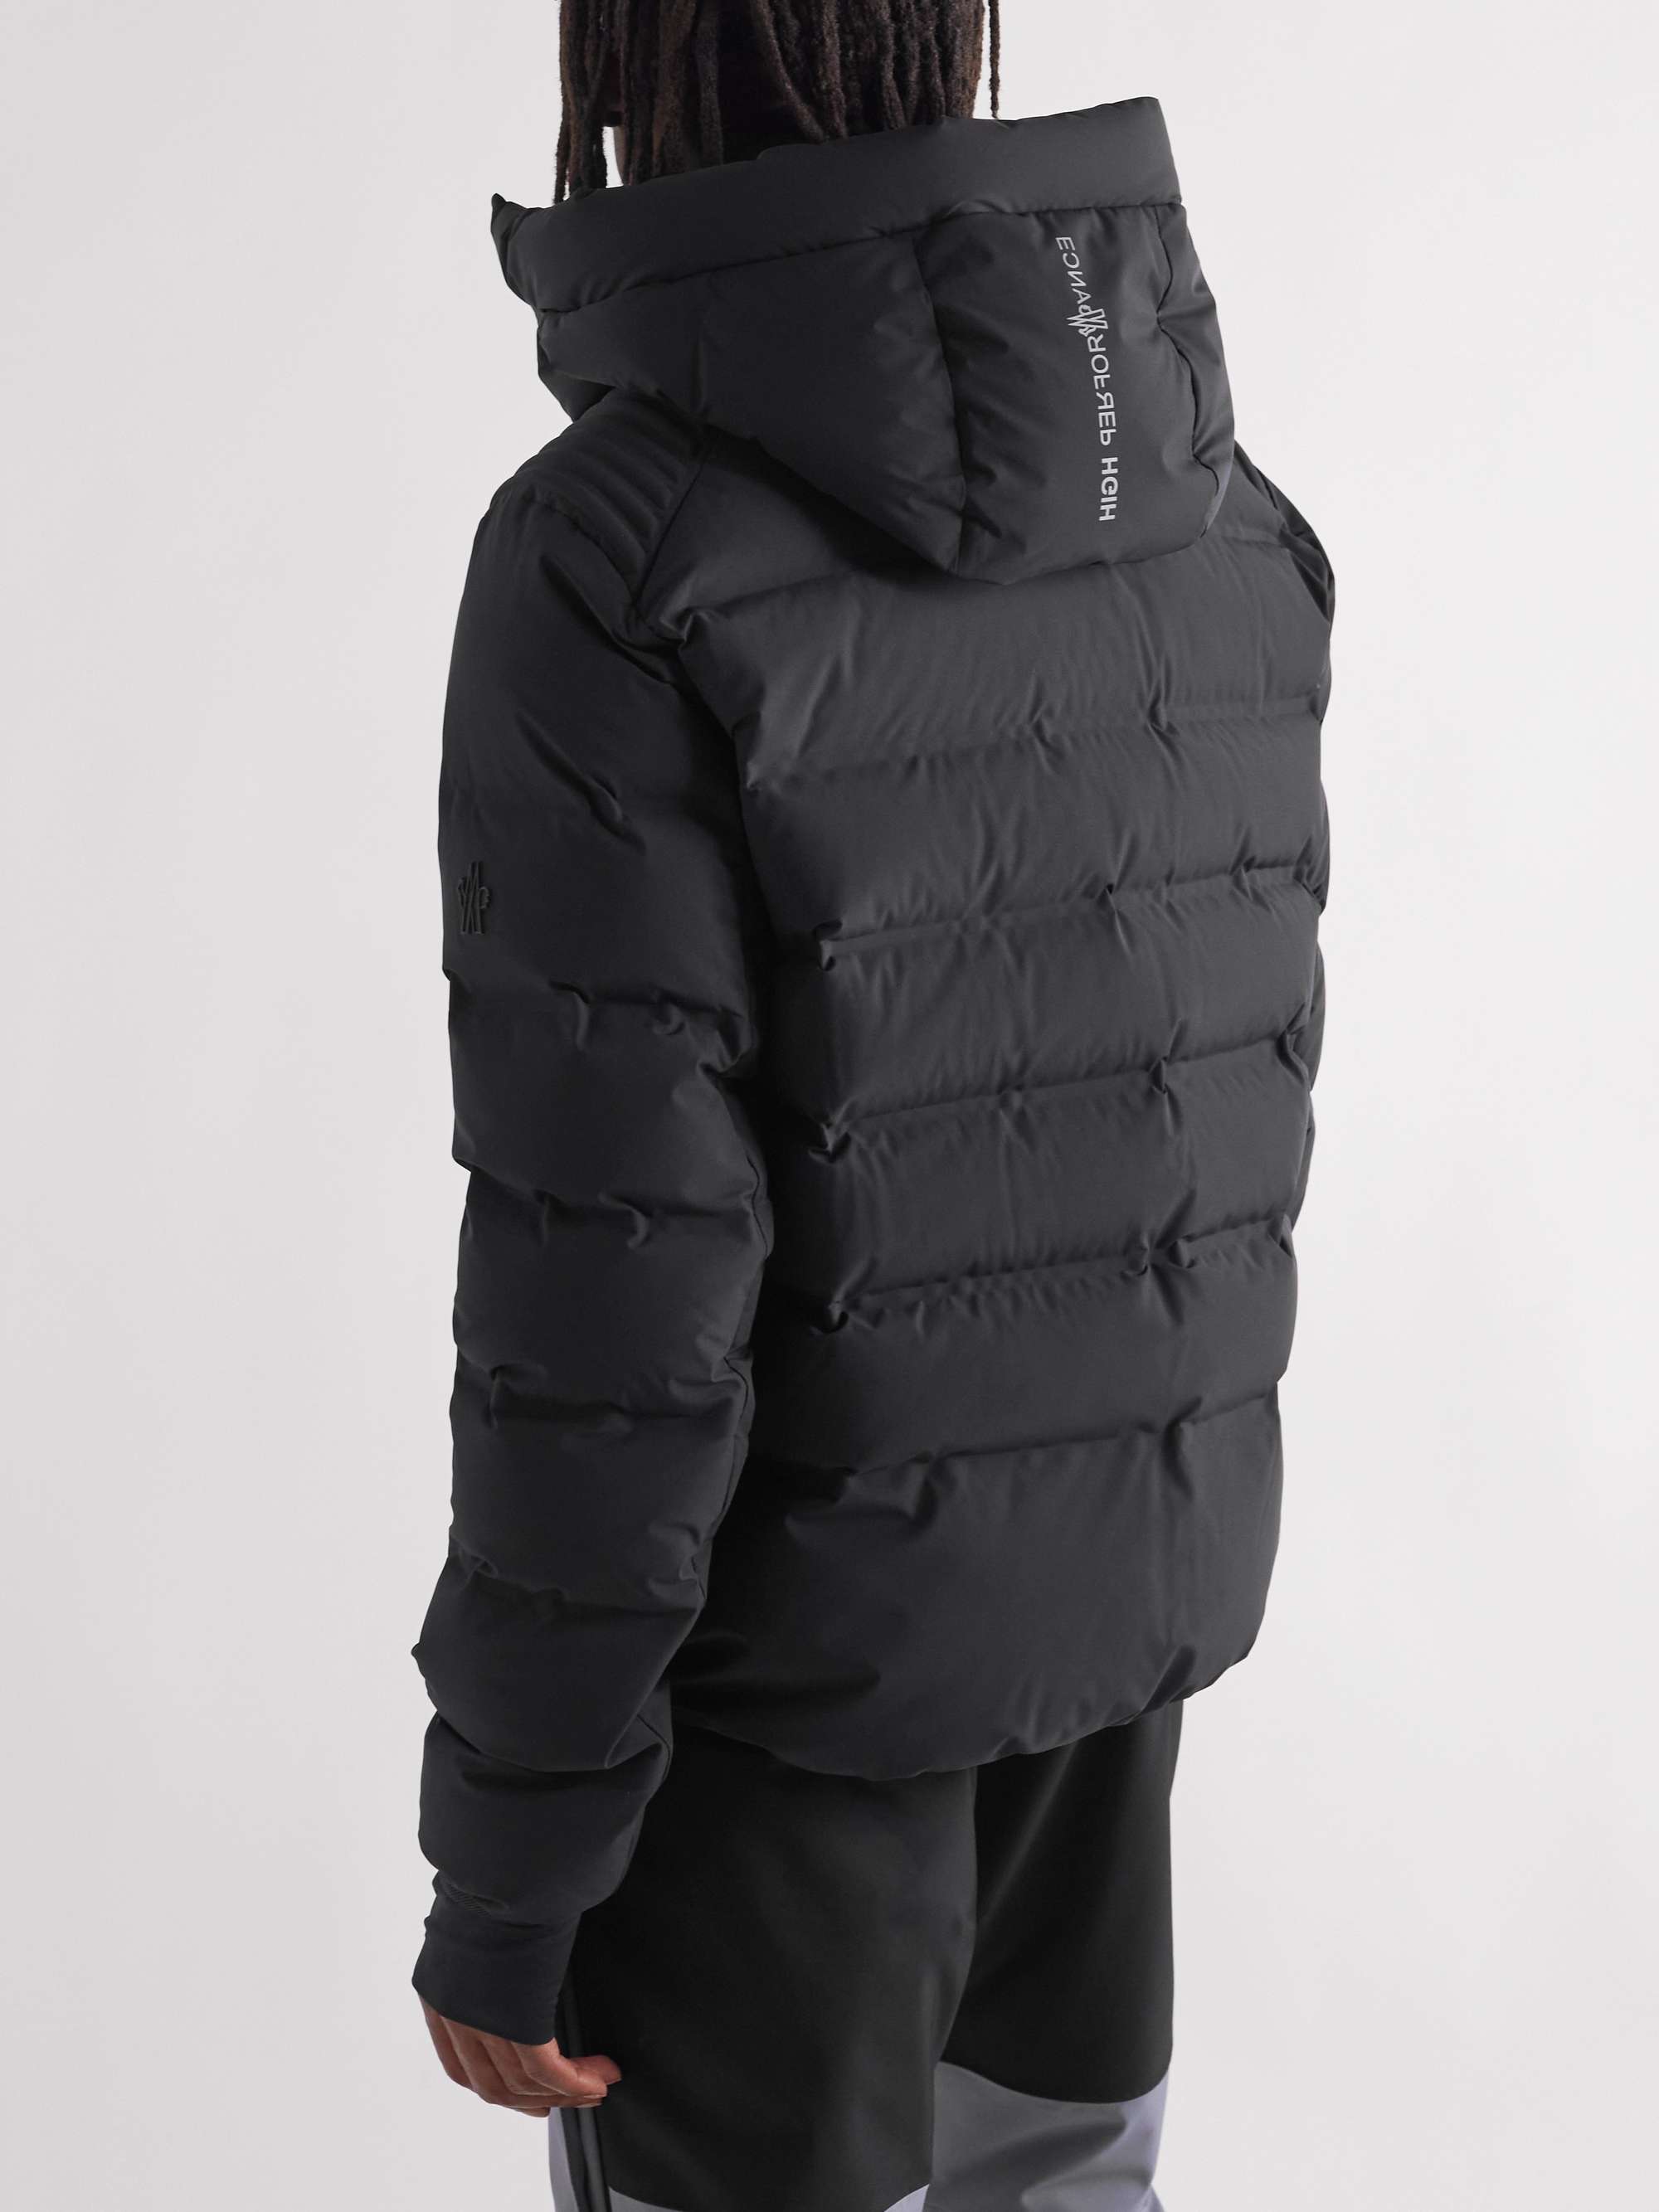 MONCLER GRENOBLE Lagorai Quilted Hooded Down Ski Jacket